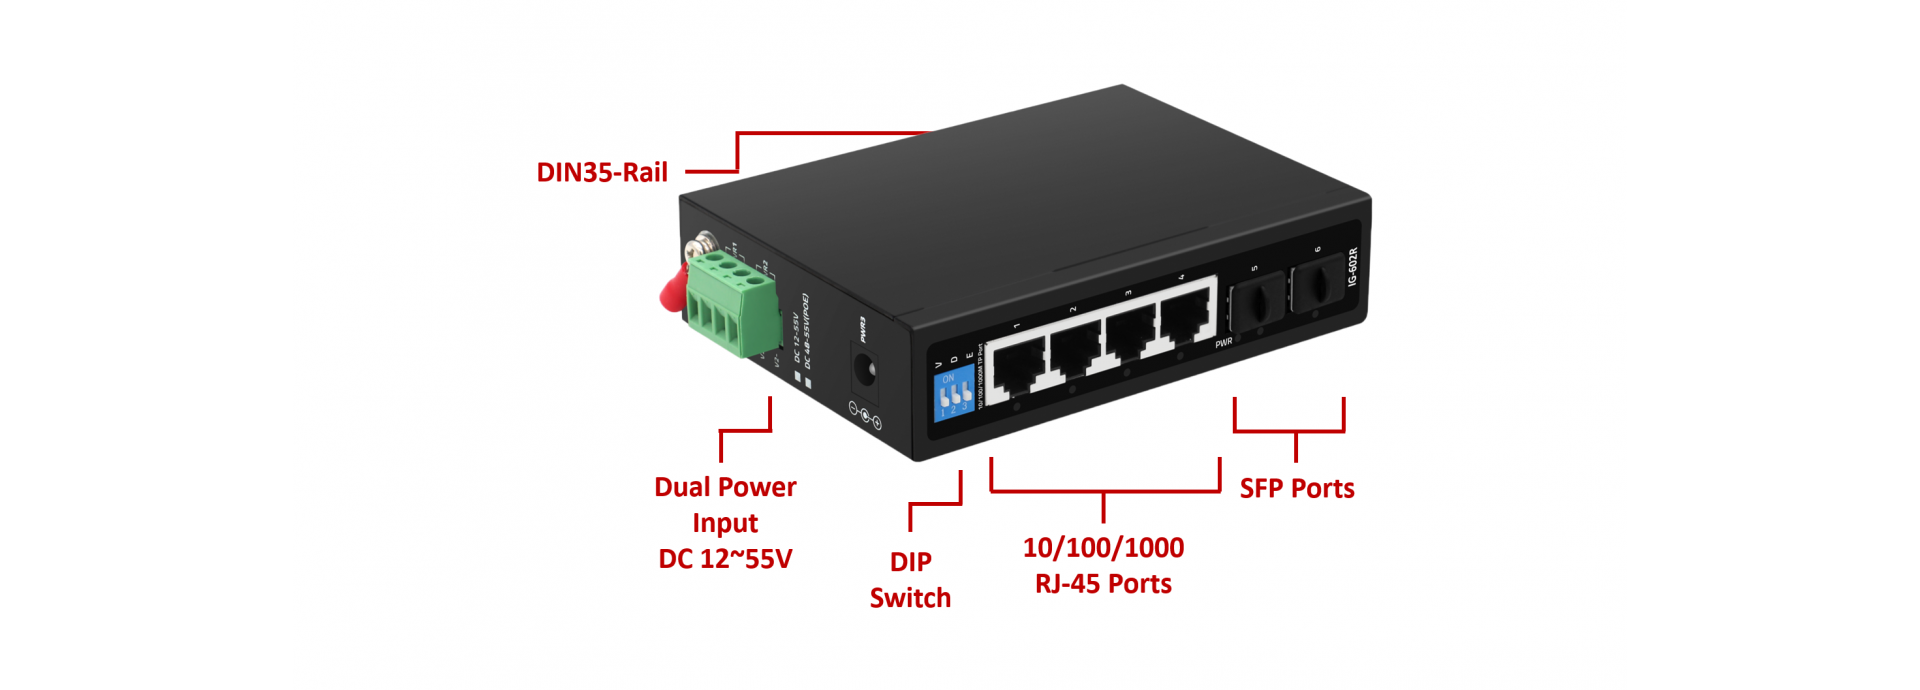 Reliable Industrial-grade Unmanaged Switch for extreme environment